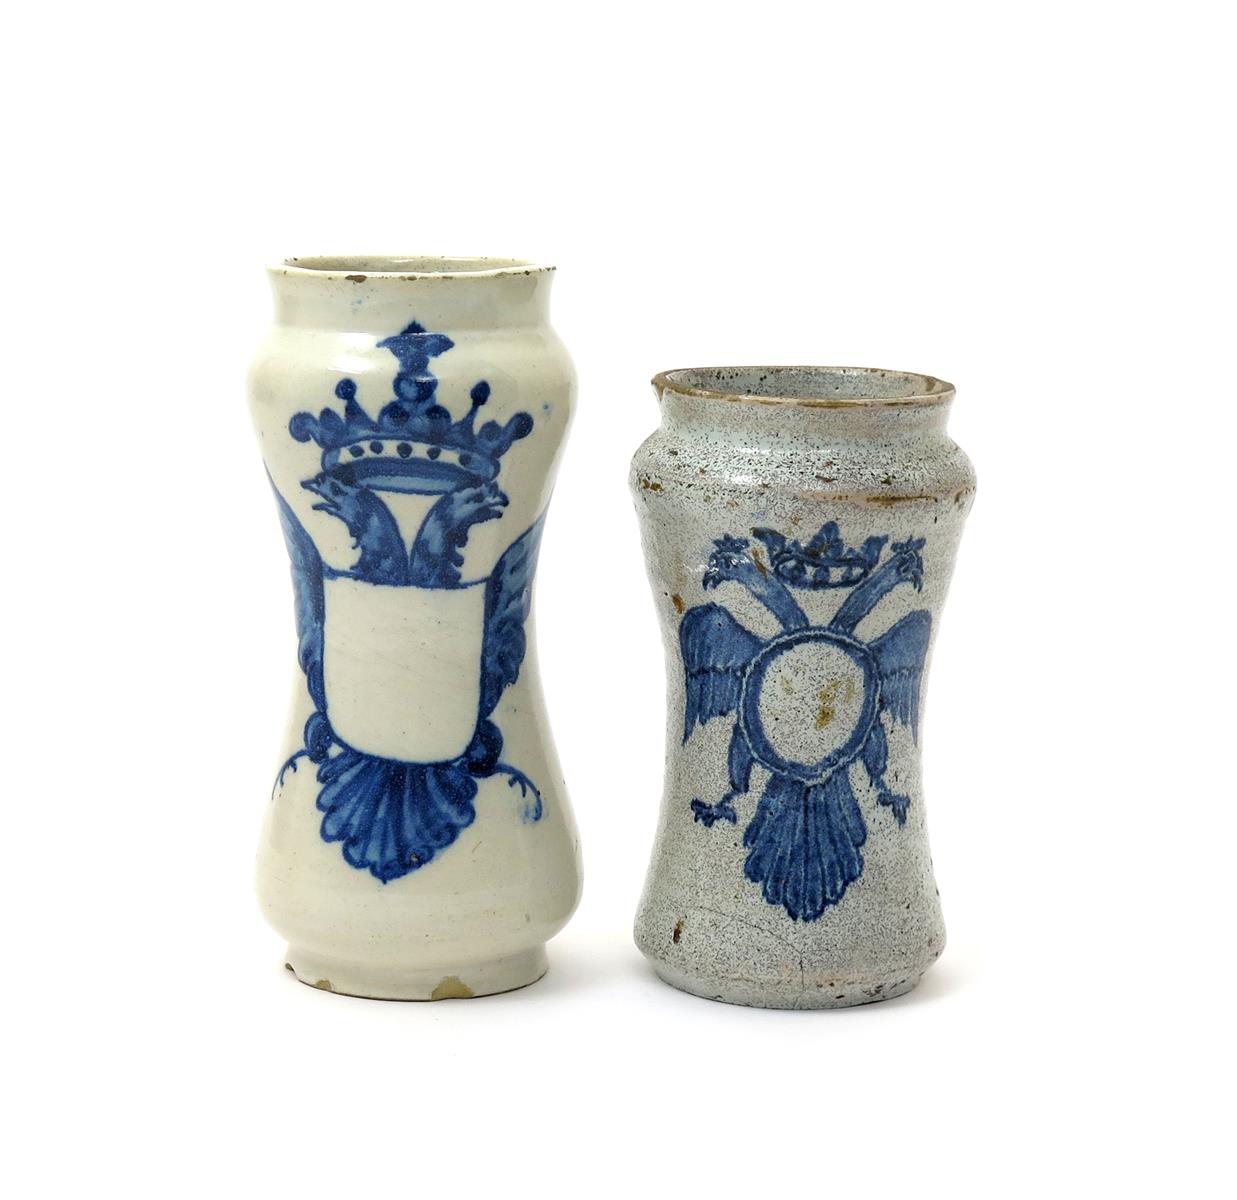 Two Talavera albarelli, c.1760, each waisted form painted in blue with an armorial device derived